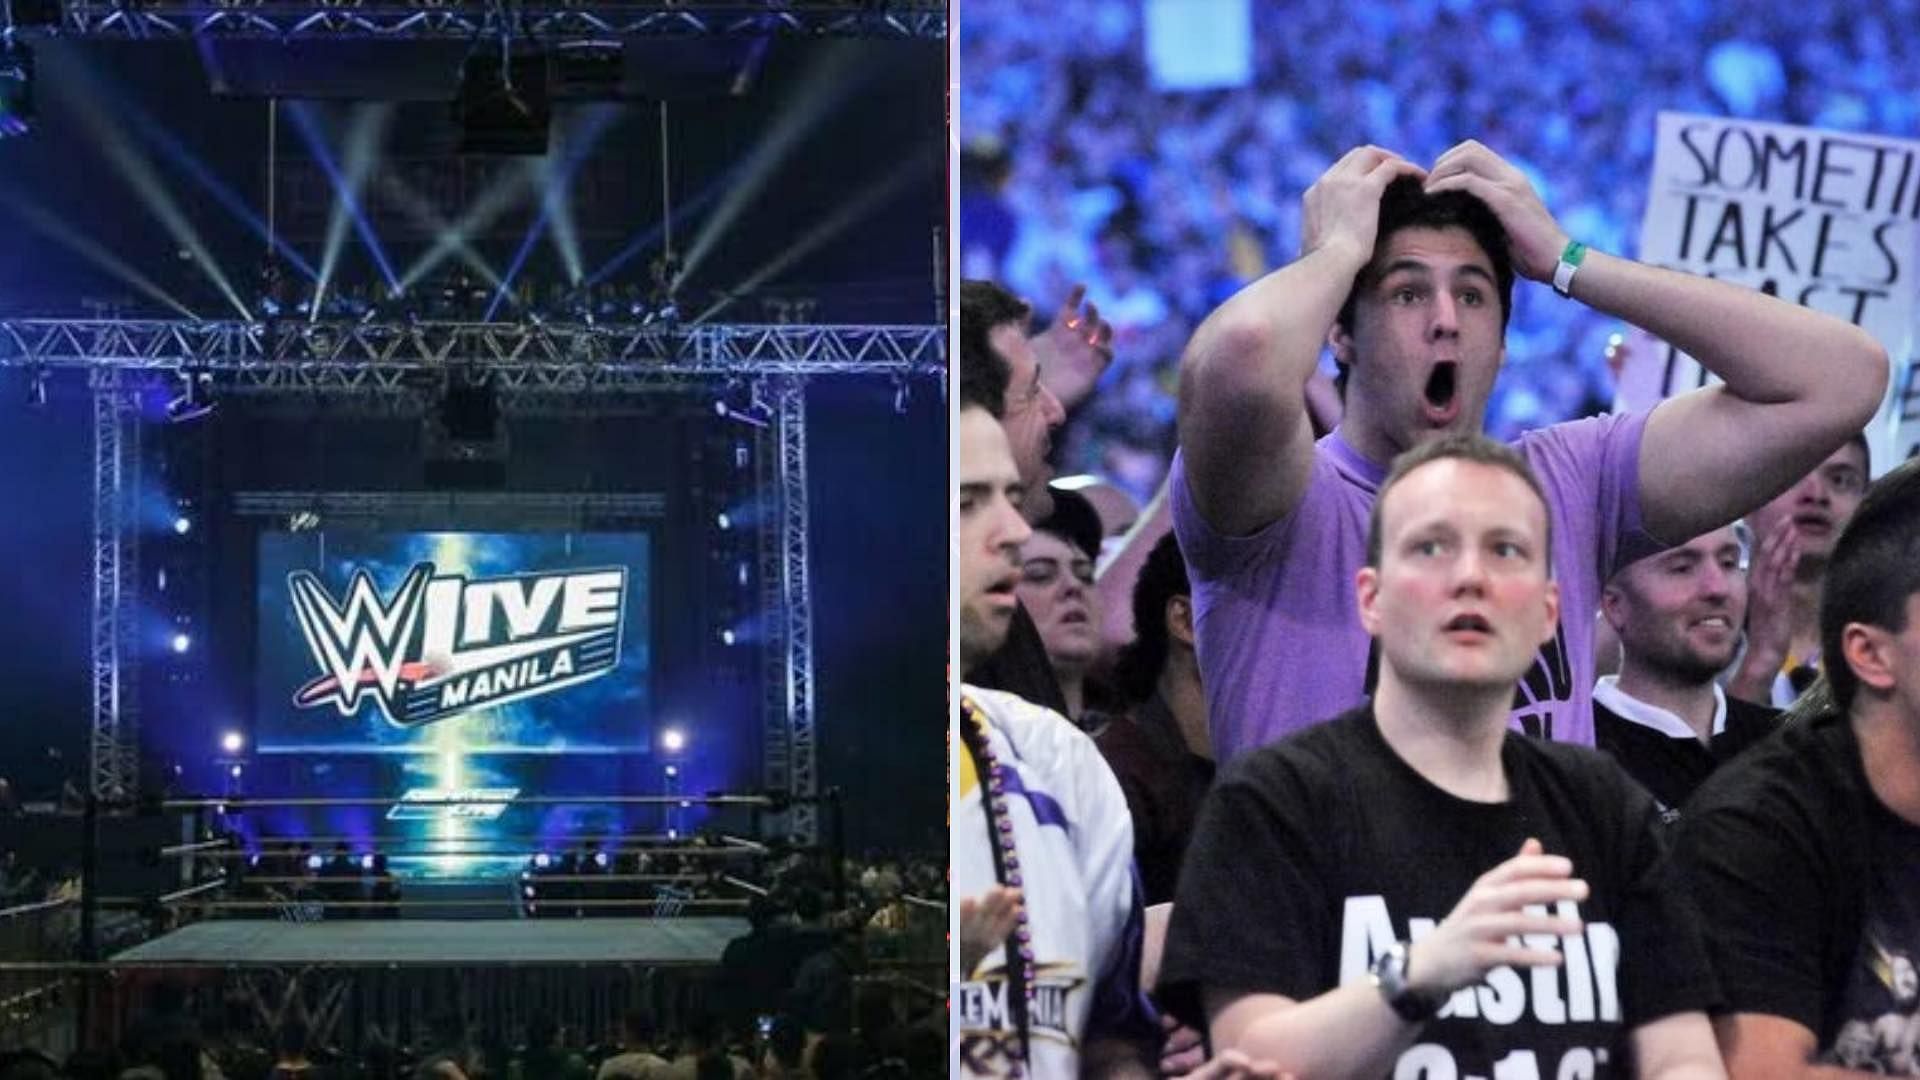 Massive breakup teased at recent WWE show